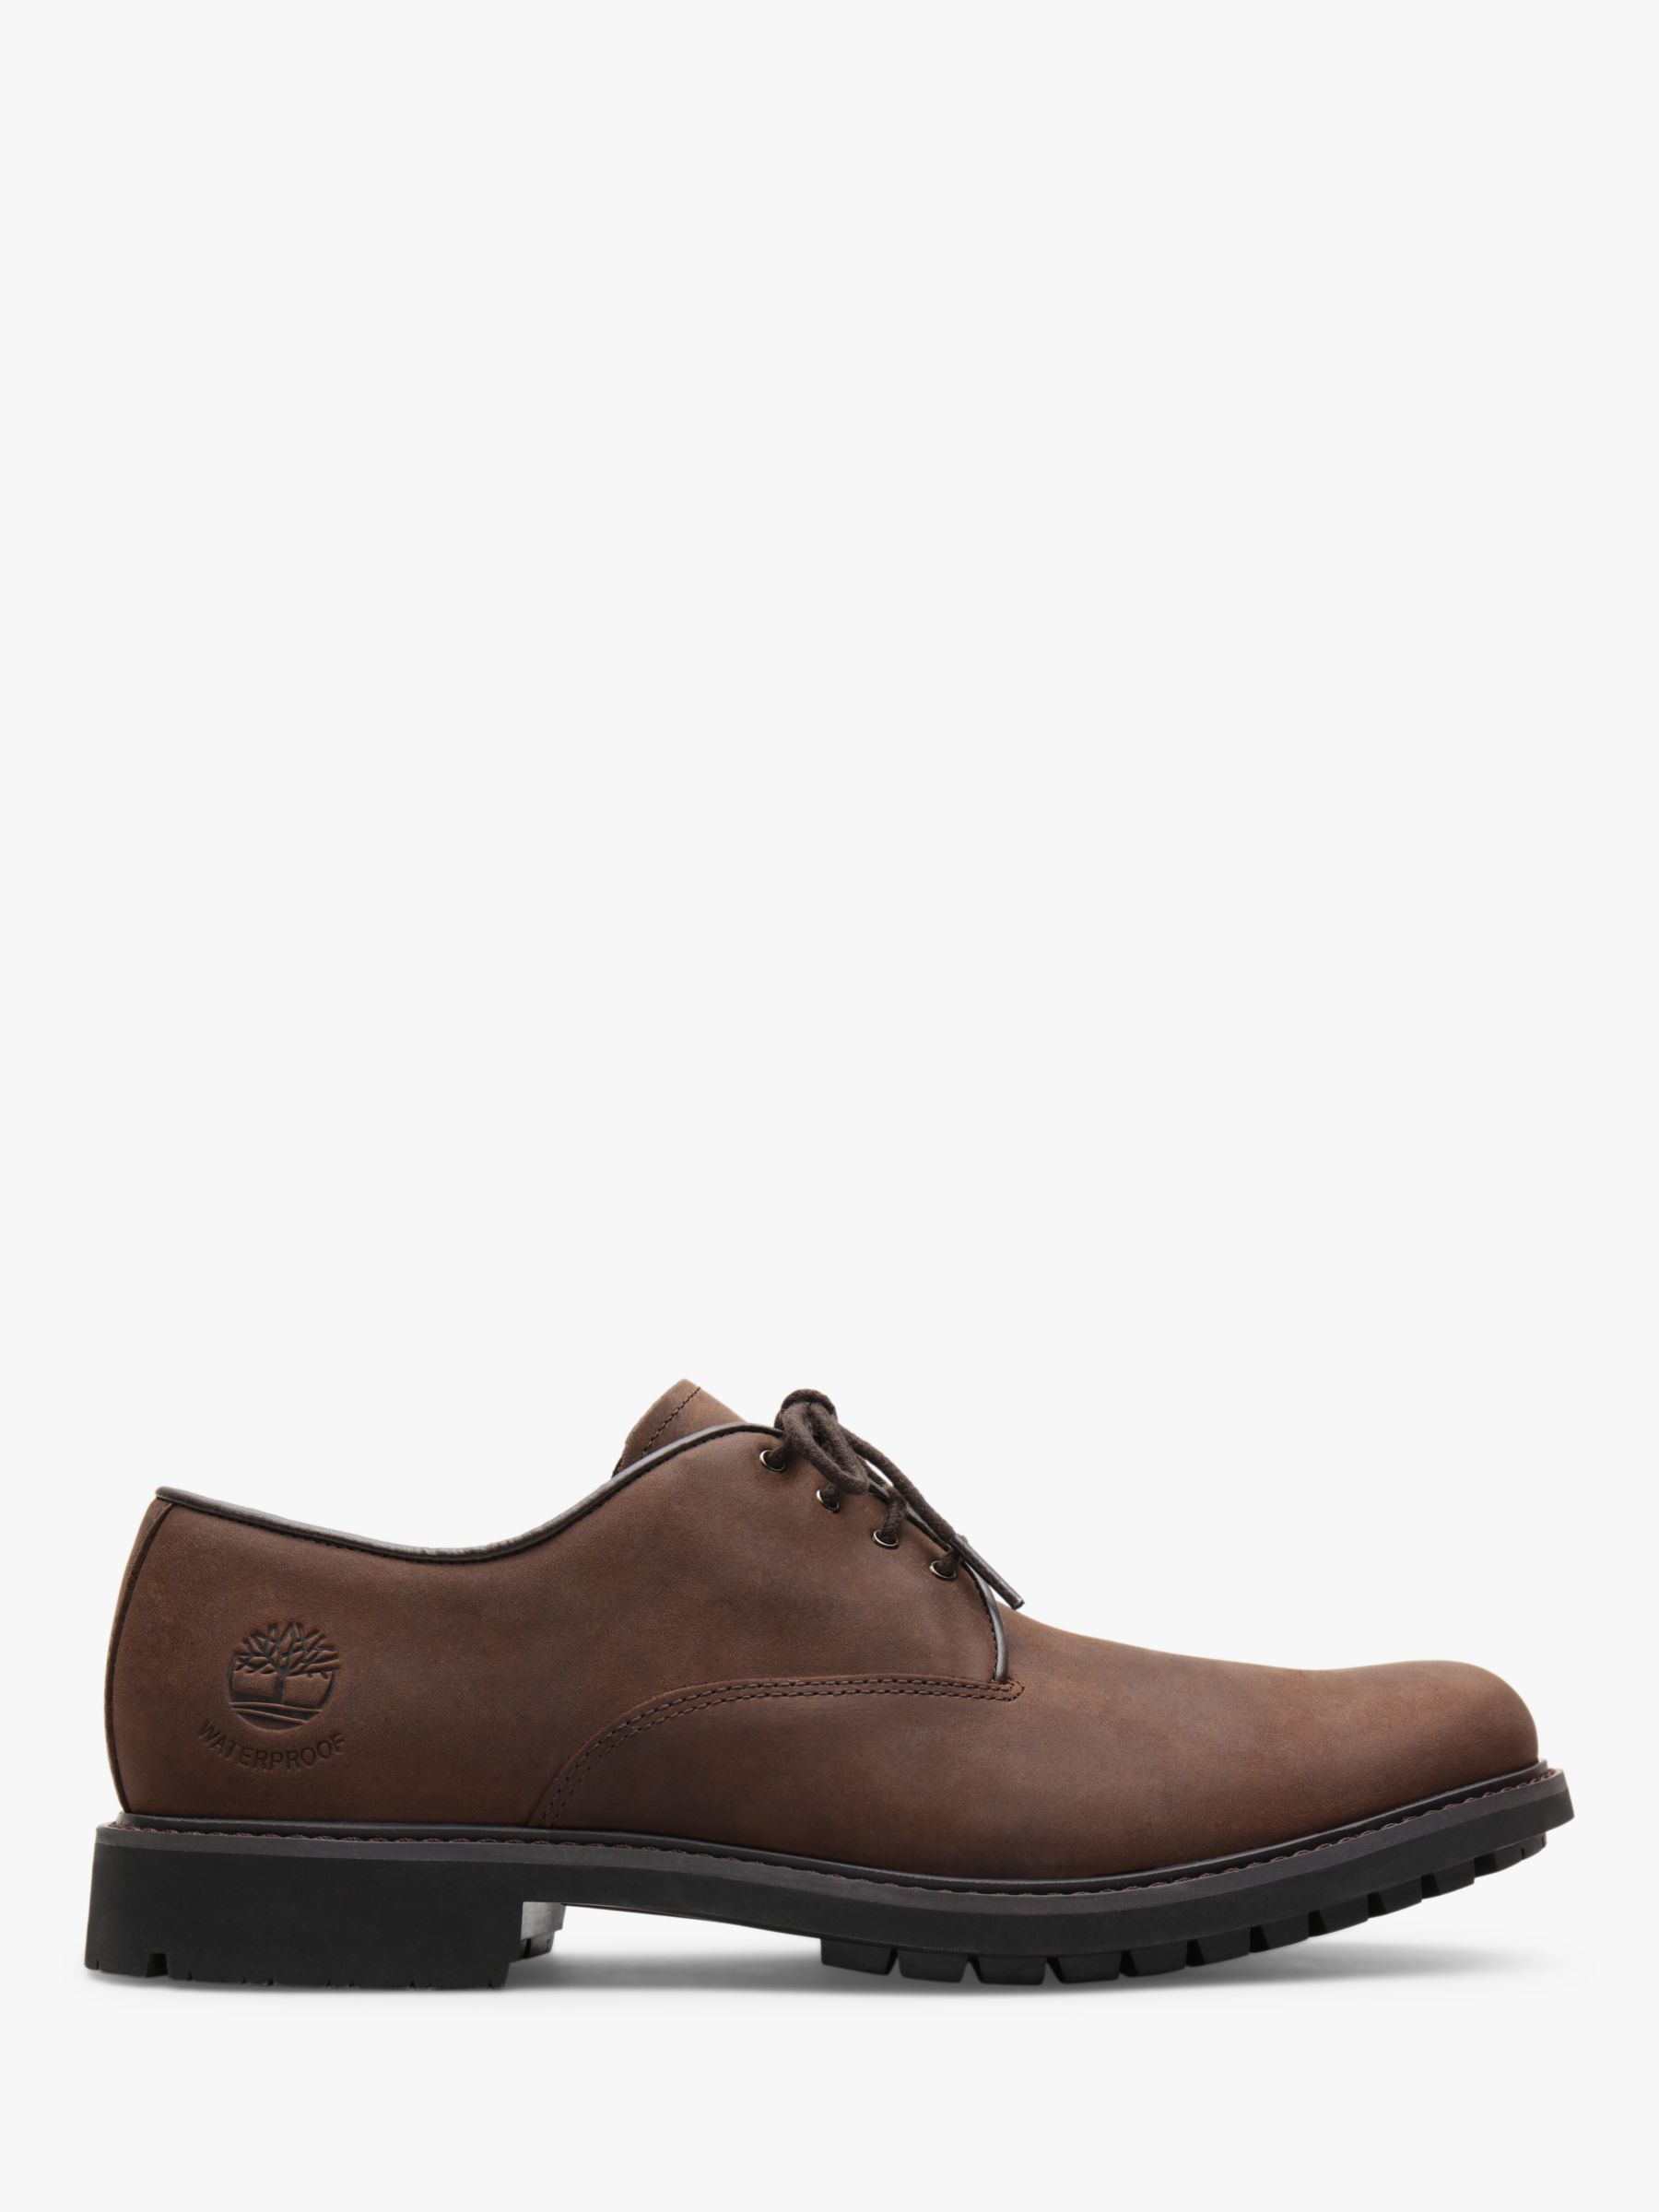 Buy Timberland Stormbuck Plain Toe Oxford Shoes Online at johnlewis ...